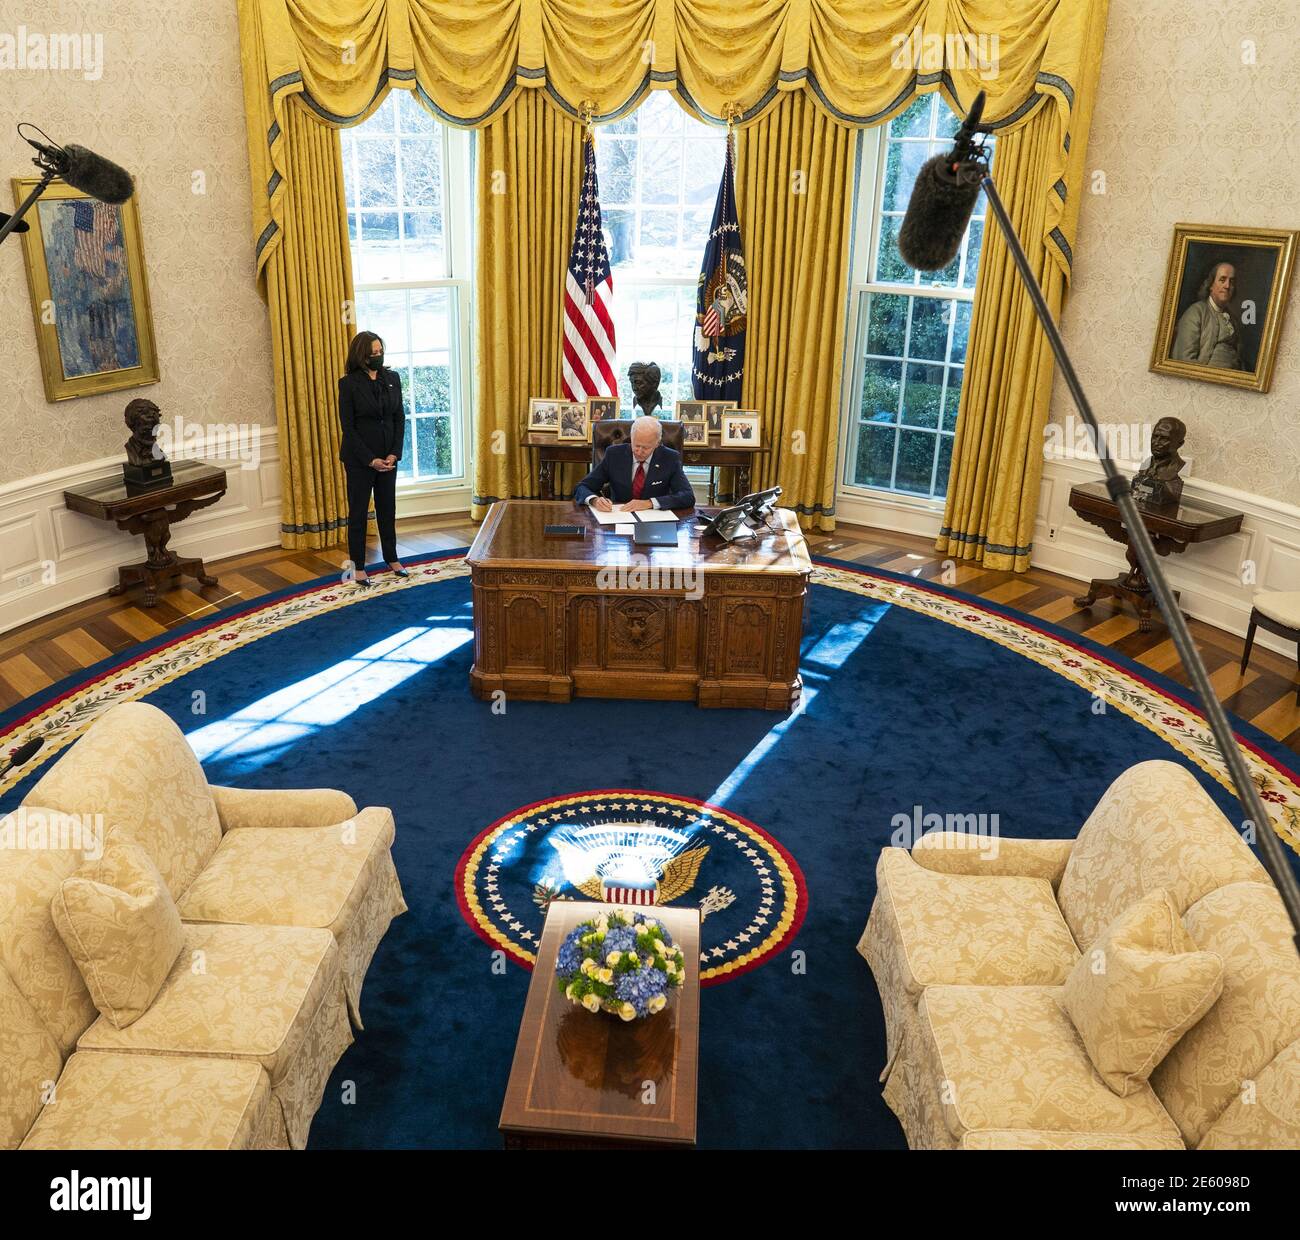 Washington, United States. 28th Jan, 2021. President Joe Biden signs executive actions strengthening Americans' access to quality, affordable health care, in the Oval Office of the White House on Thursday, January 26, 2021. Vice President Kamala Harris is at left. Pool Photo by Doug Mills/UPI Credit: UPI/Alamy Live News Stock Photo